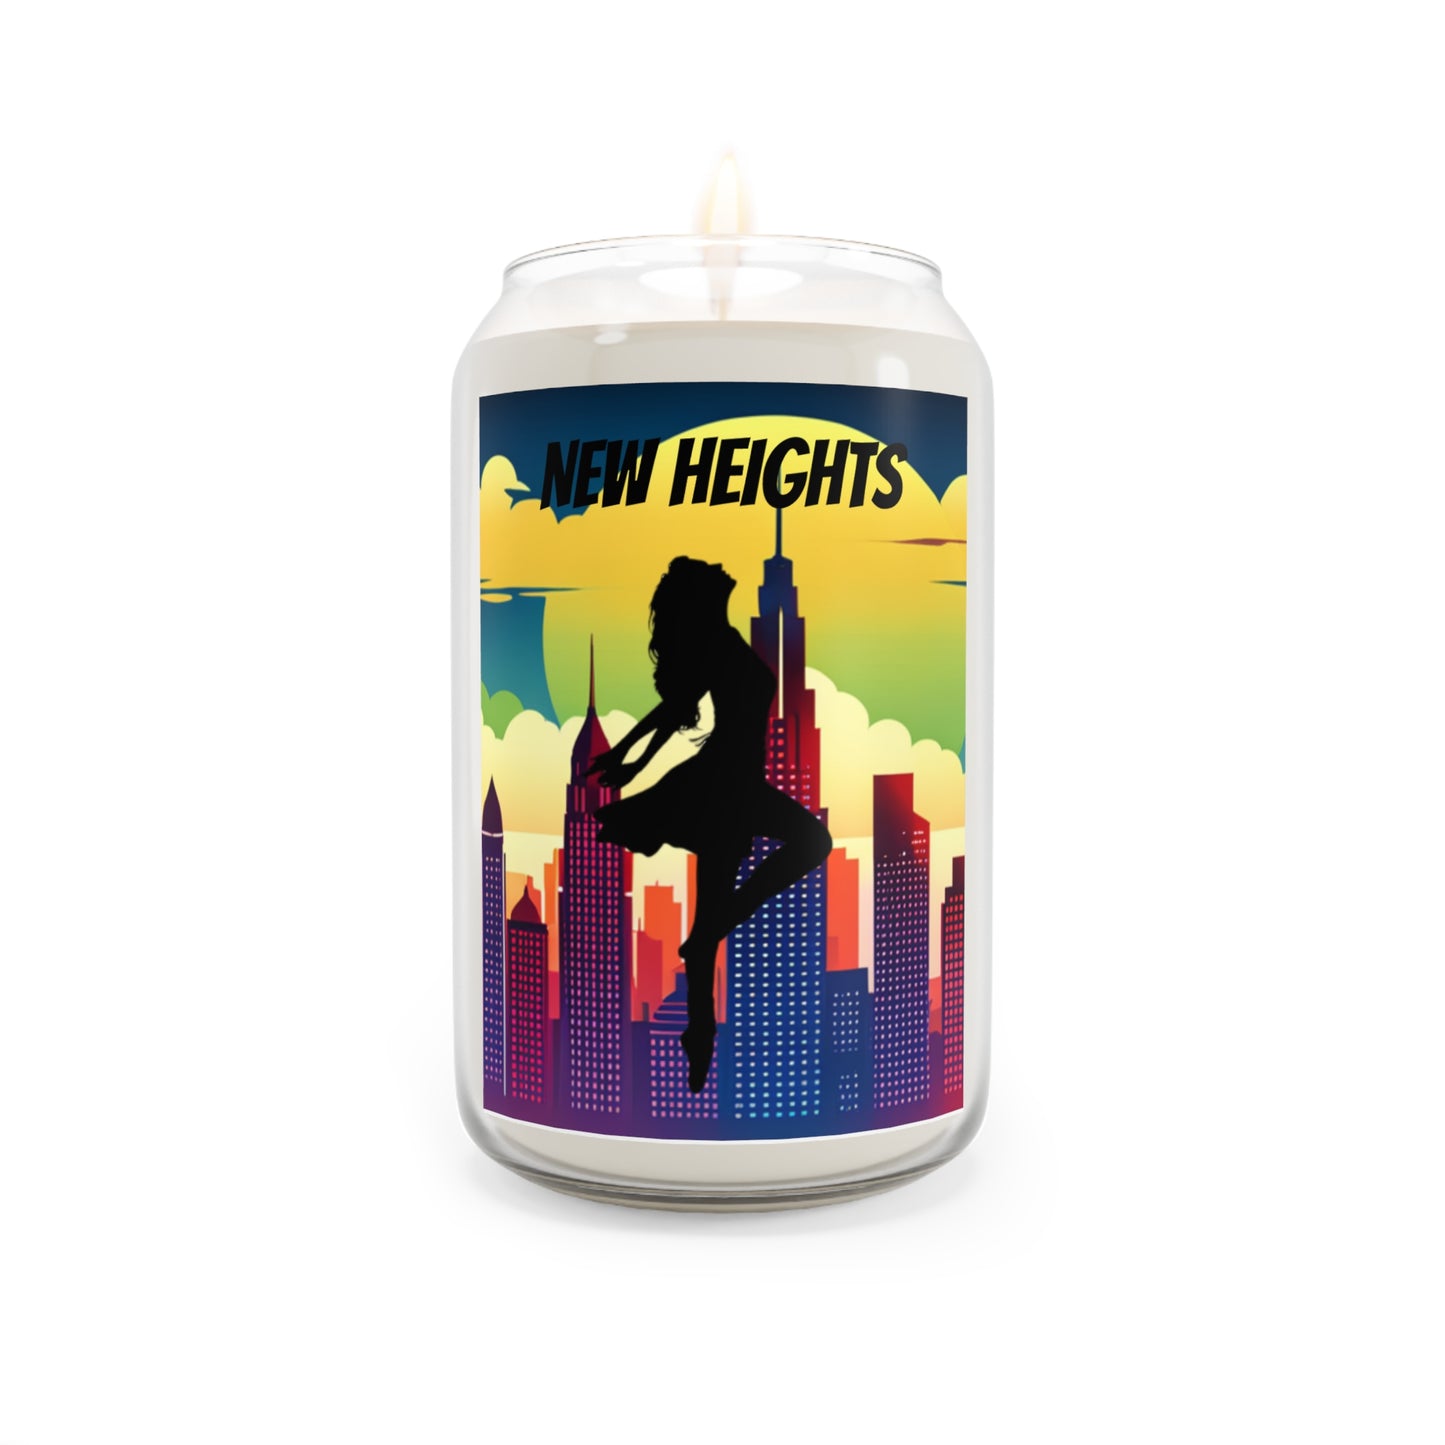 New Heights Scented Candle, 13.75oz